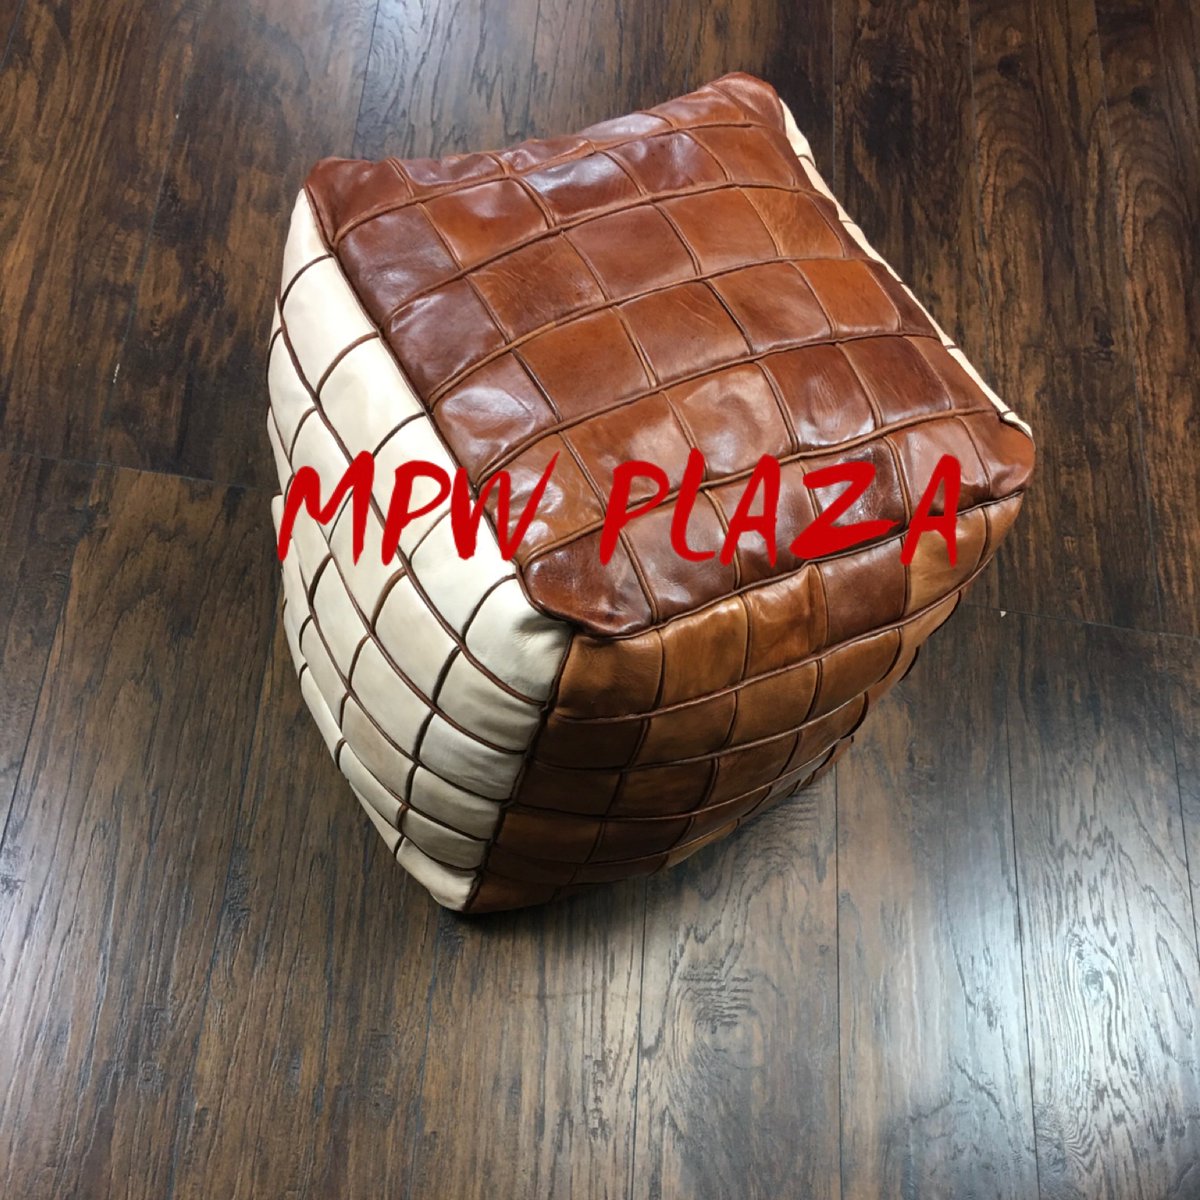 🌹 Treat yourself to a Premium MPWplaza Luxury Pouf 🌺 ships from USA🌹
#luxuryhouses #luxurylifestyles #luxurygirl #luxurylivingroom #luxurystyle #luxuryapartments #luxuryshopping #luxuryshoes #luxurybags #luxurycollection #luxurycondos #luxurymansion #luxuryproperty #affiliate